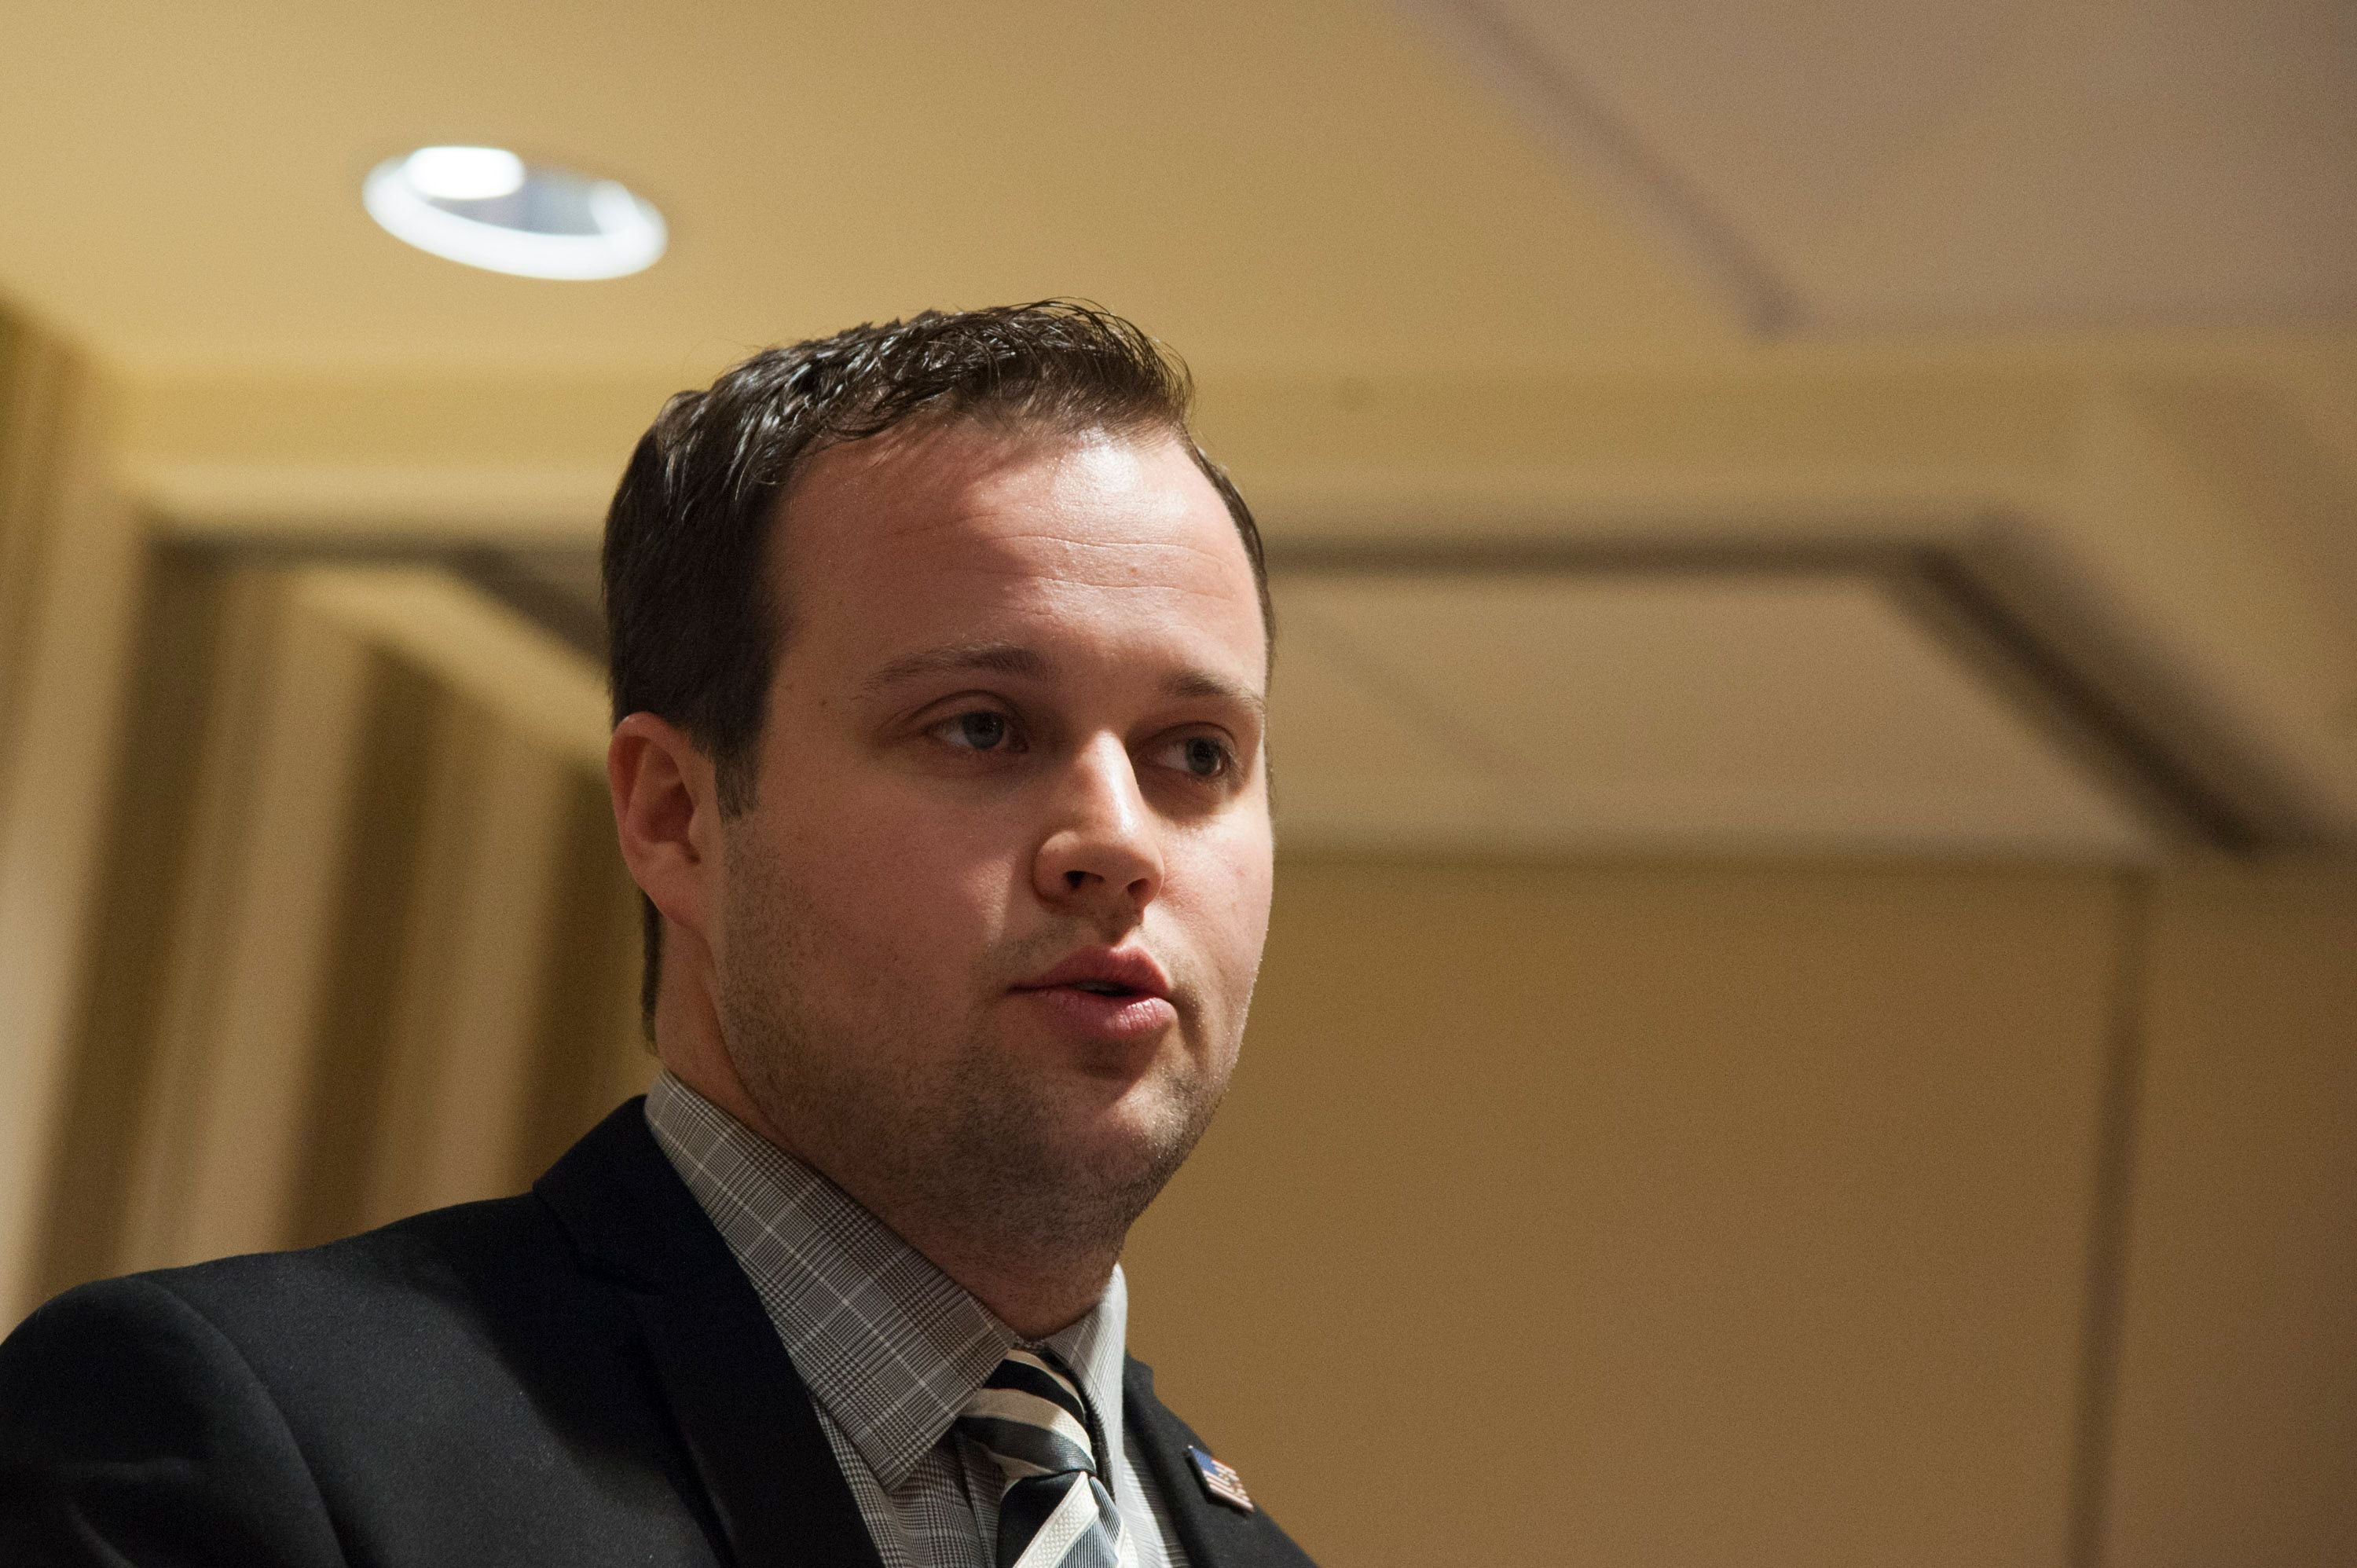 Josh Duggar speaking during the 42nd annual Conservative Political Action Conference at the Gaylord National Resort Hotel and Convention Center in National Harbor, Maryland | Photo: Kris Connor/Getty Images